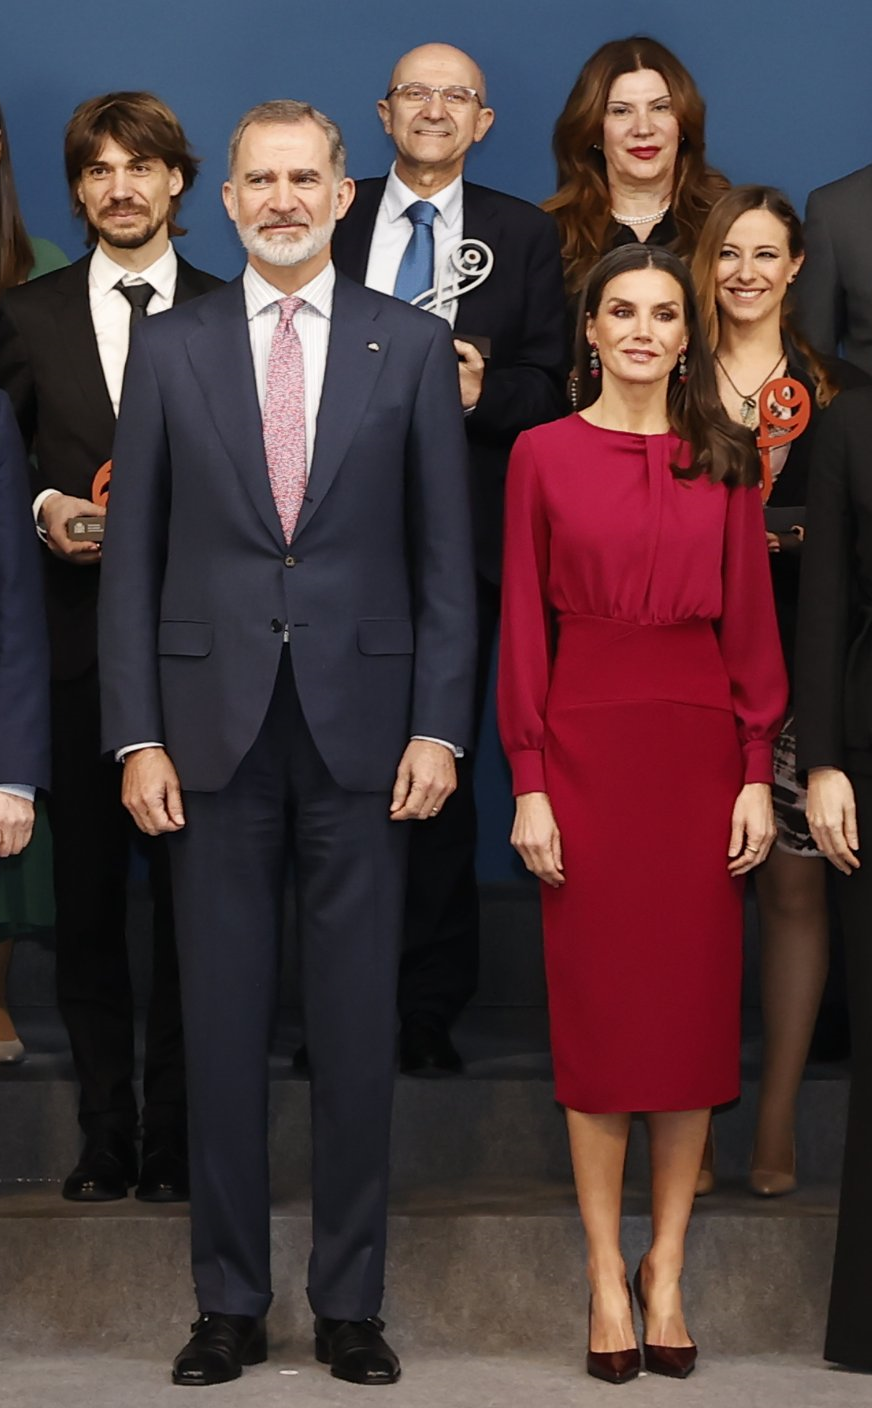 King Felipe VI and Queen Letizia of Spain attended the ceremony of the National Research Awards 2022 in Alicante on 1st March 2023